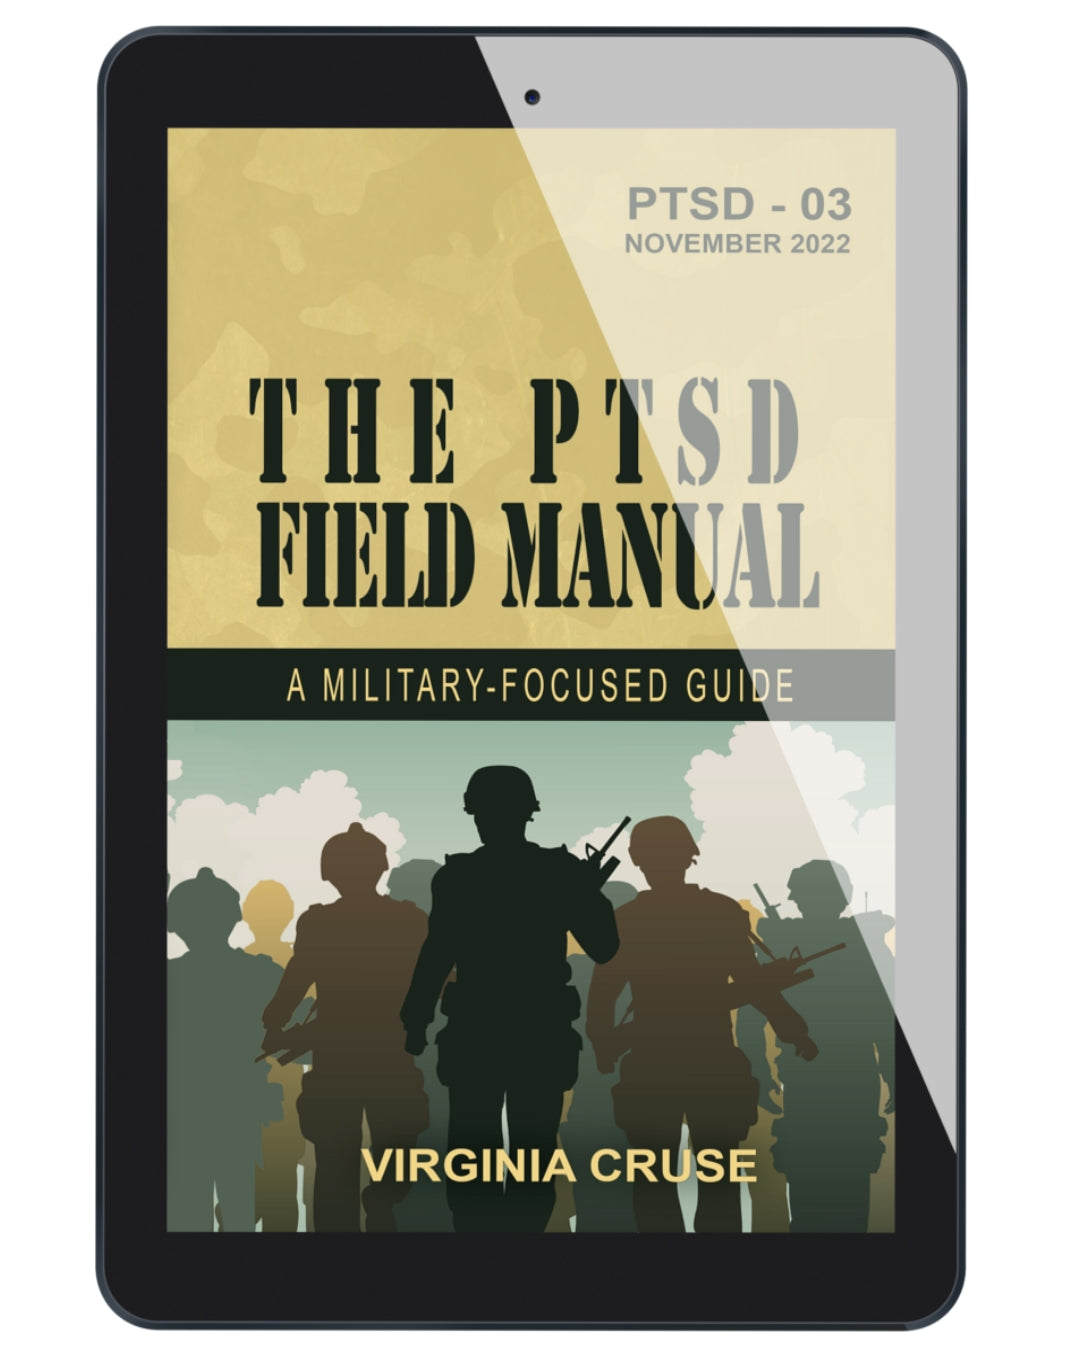 The PTSD Field Manual EBOOK: A Military-Focused Guide